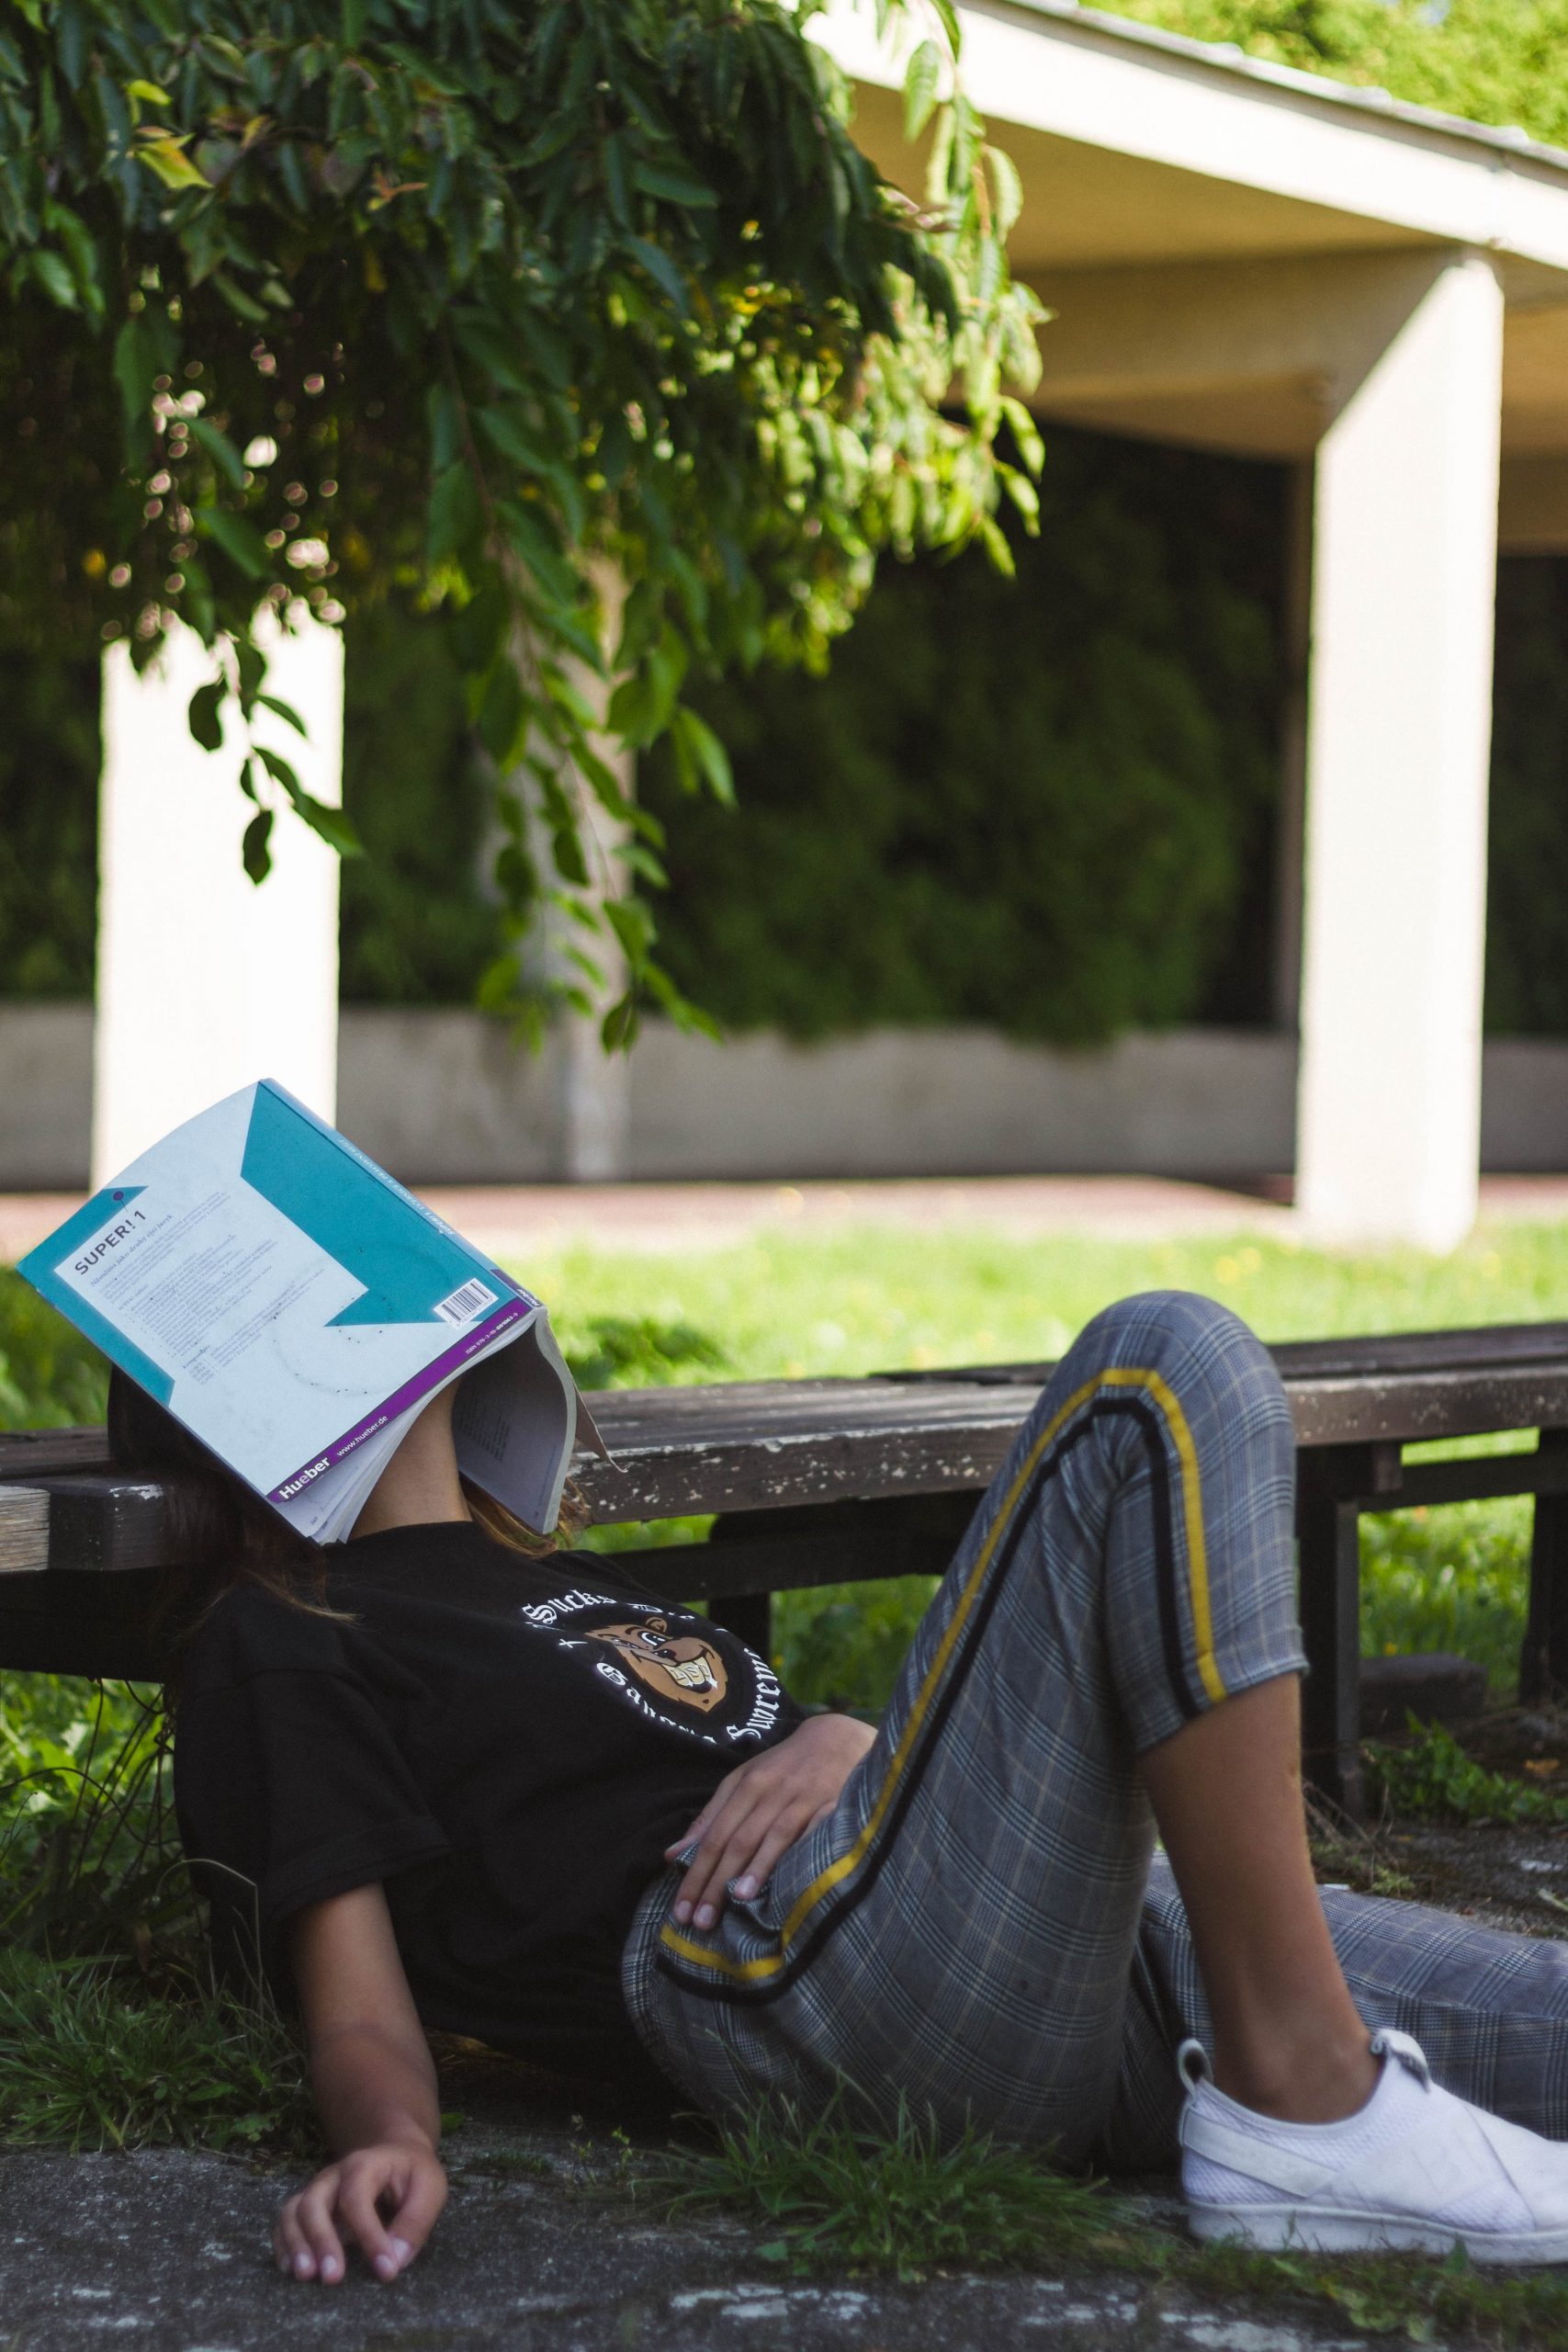 A girl leaning against a bench outside with a book covering her face. She is tired.